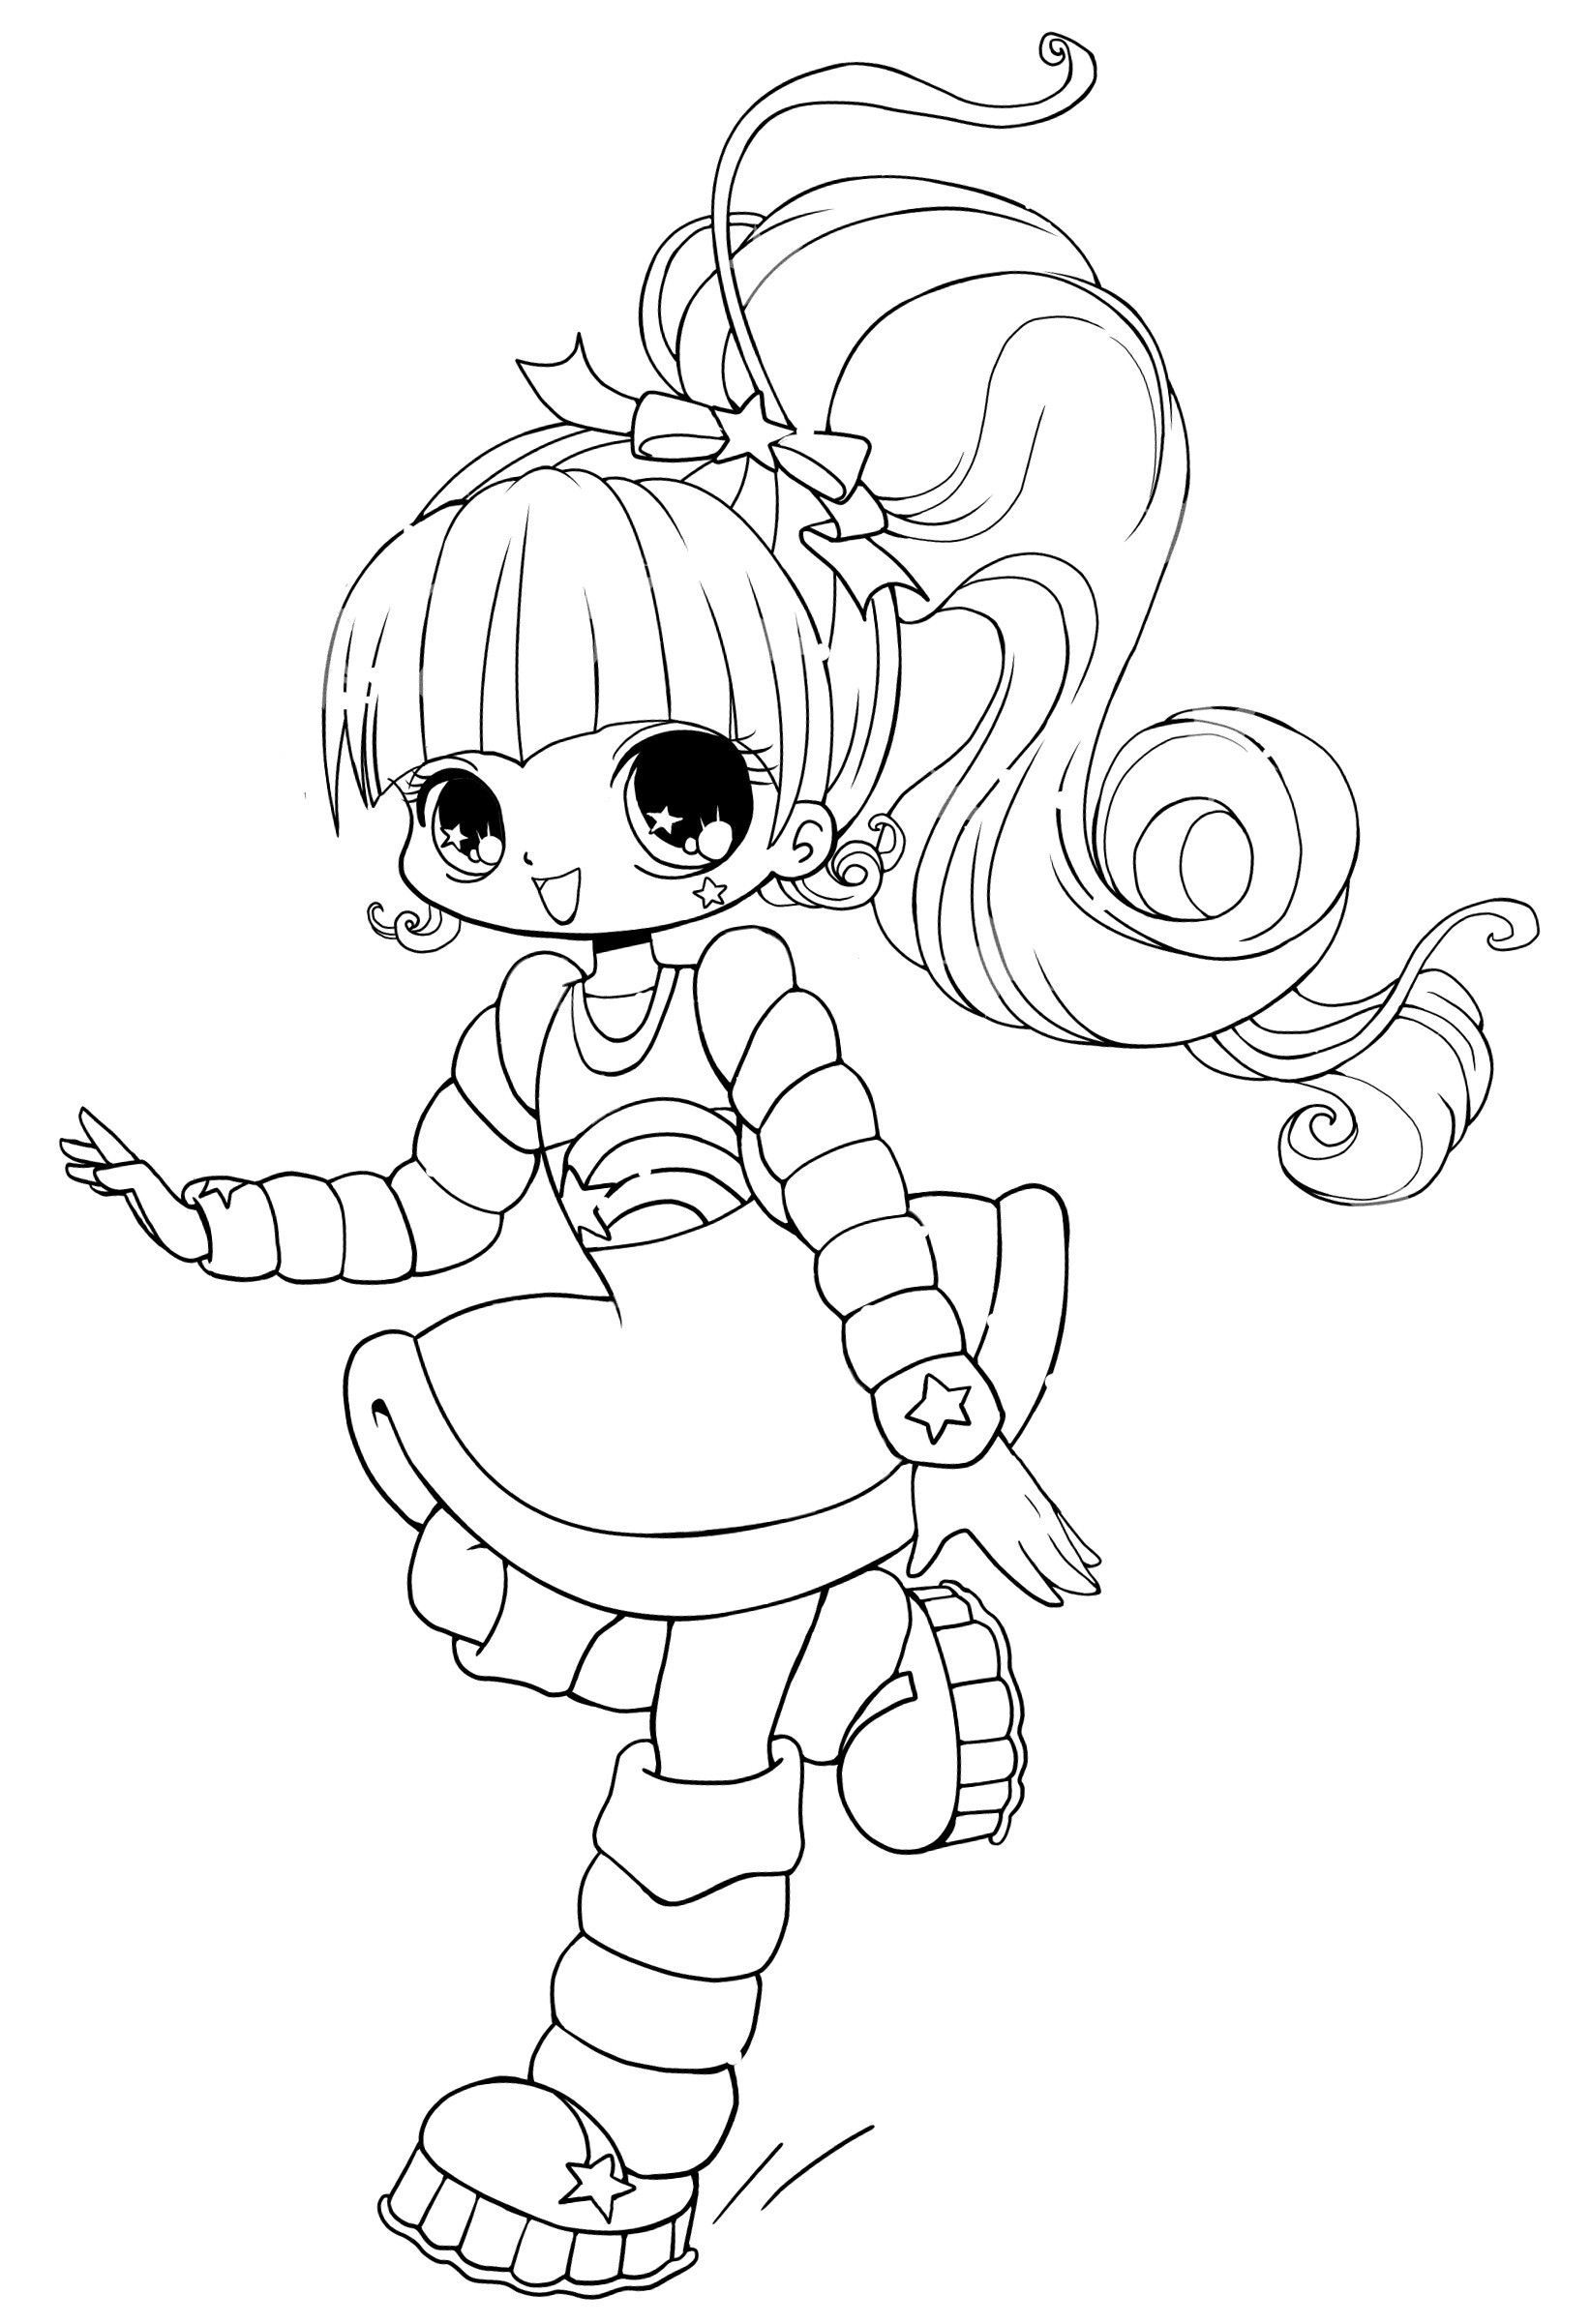 Cute Girls Coloring Pages
 1000 images about dessin a colorier 12 on Pinterest